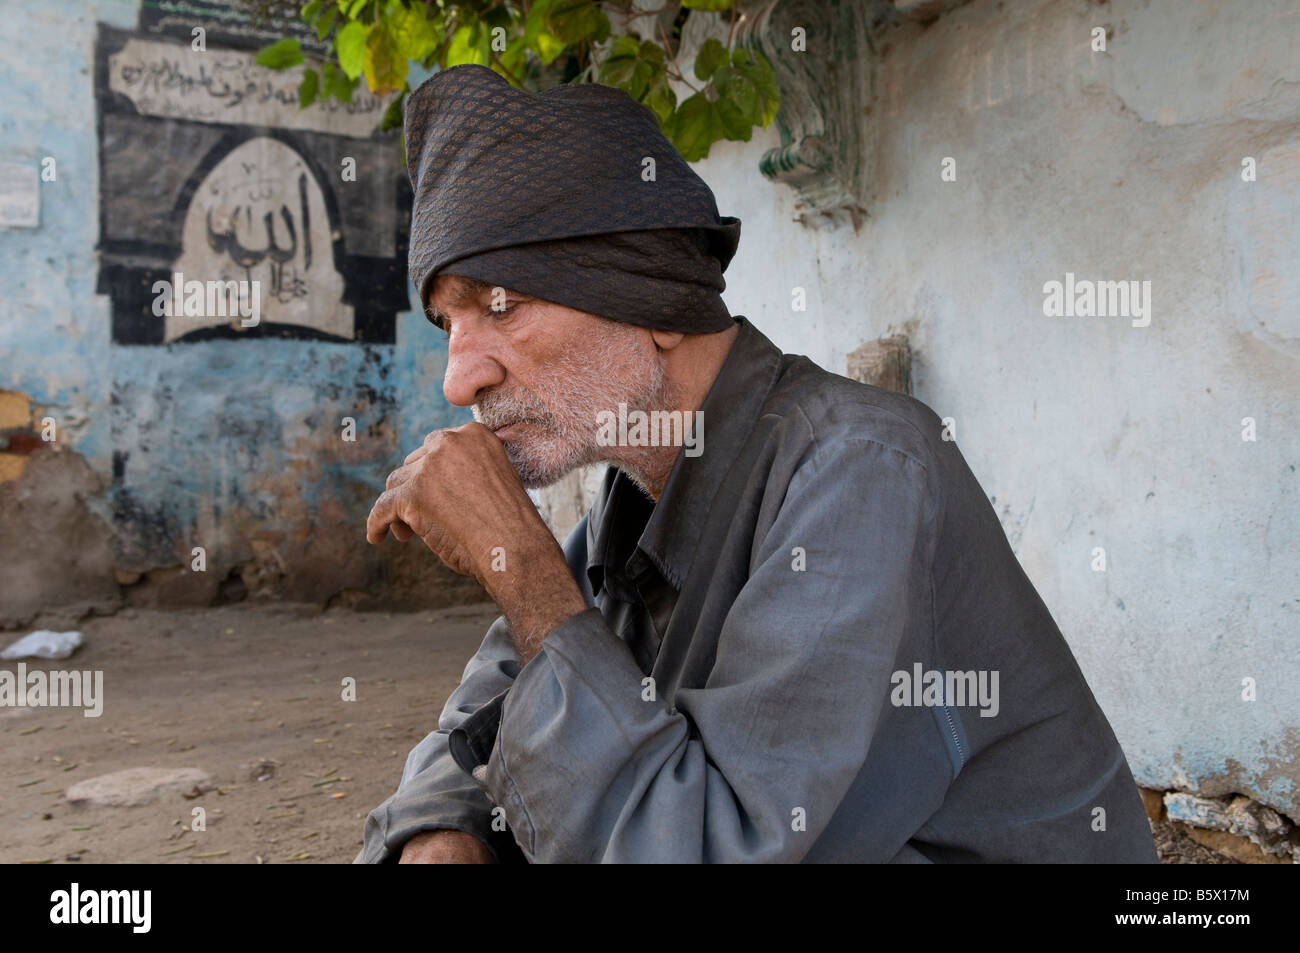 An Egyptian man in the City of the Dead or Cairo Necropolis where some people live and work amongst the dead in southeastern Cairo, Egypt. Stock Photo